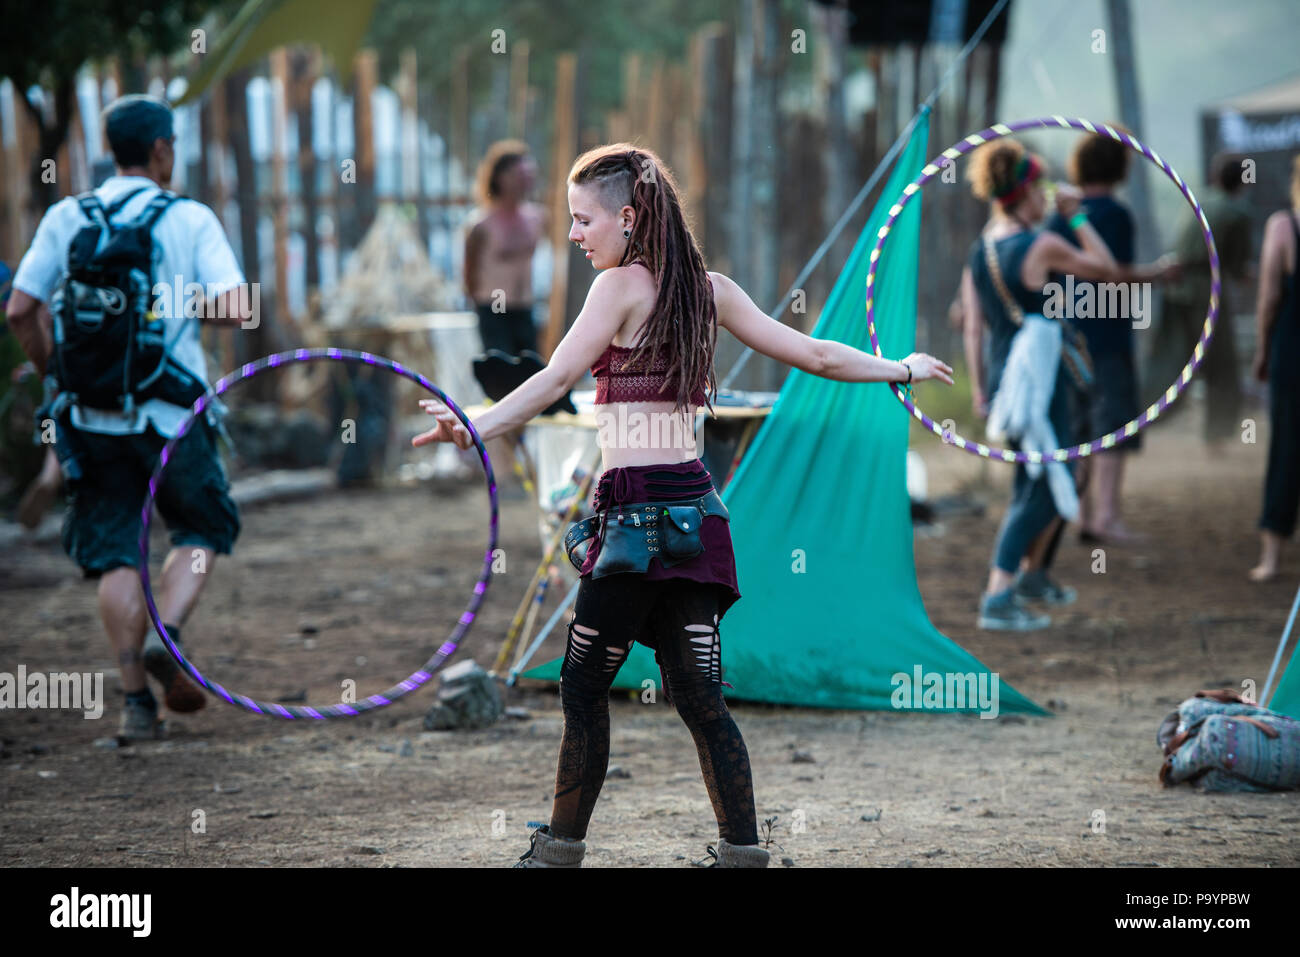 A young woman juggling with two hula hoops at the same time at the Lost  Theory psytransce music festival held in Riomalo de Abajo, Las Hurdes,  Extremadura, Spain Stock Photo - Alamy